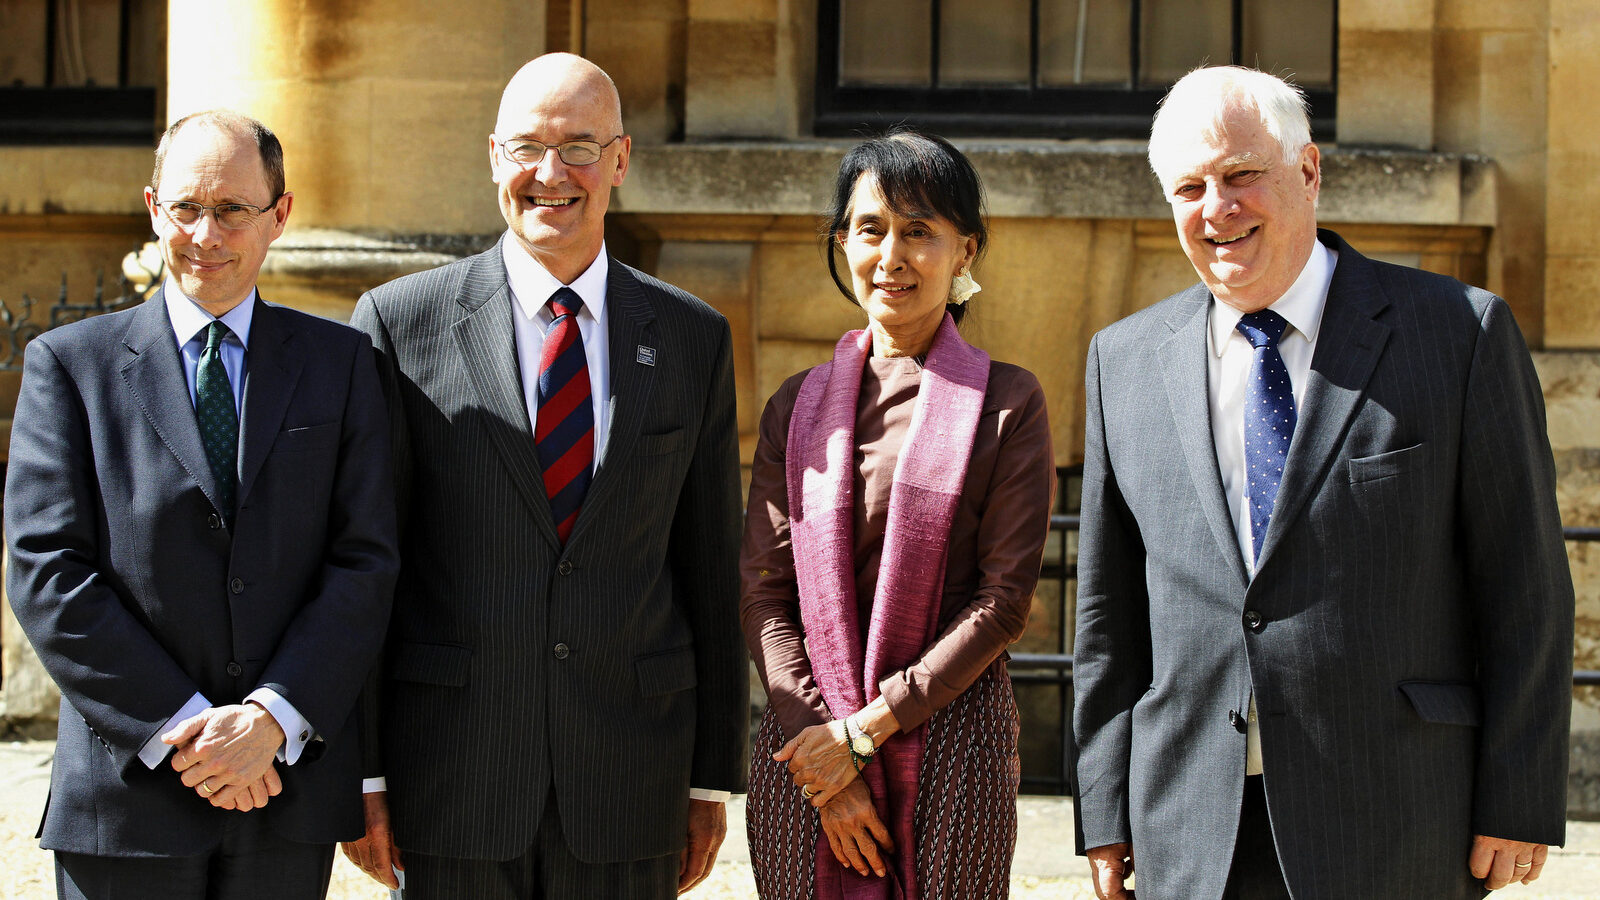 Aung San Suu Kyi when she was a Burmese pro-democracy campaigner walking with Andrew Dilnot, the Principal of St Hugh's College of the Oxford University, at a reception in Oxford in June 2012. (AP/Lefteris Pitarakis)